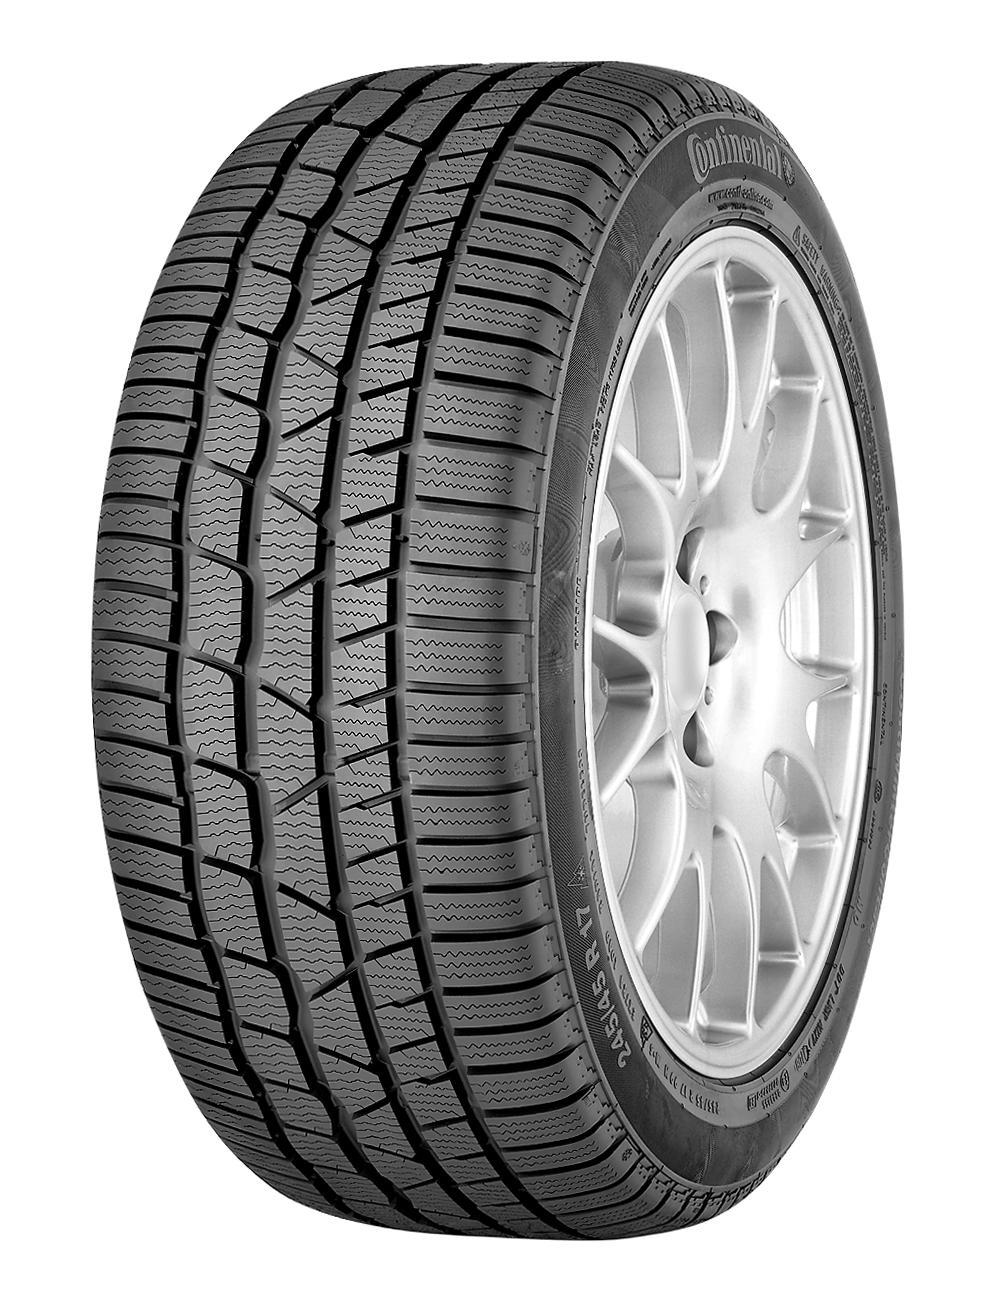 Anvelope iarna CONTINENTAL WINTER CONTACT TS830 P CONTISEAL * FR 255/50 R21 109H